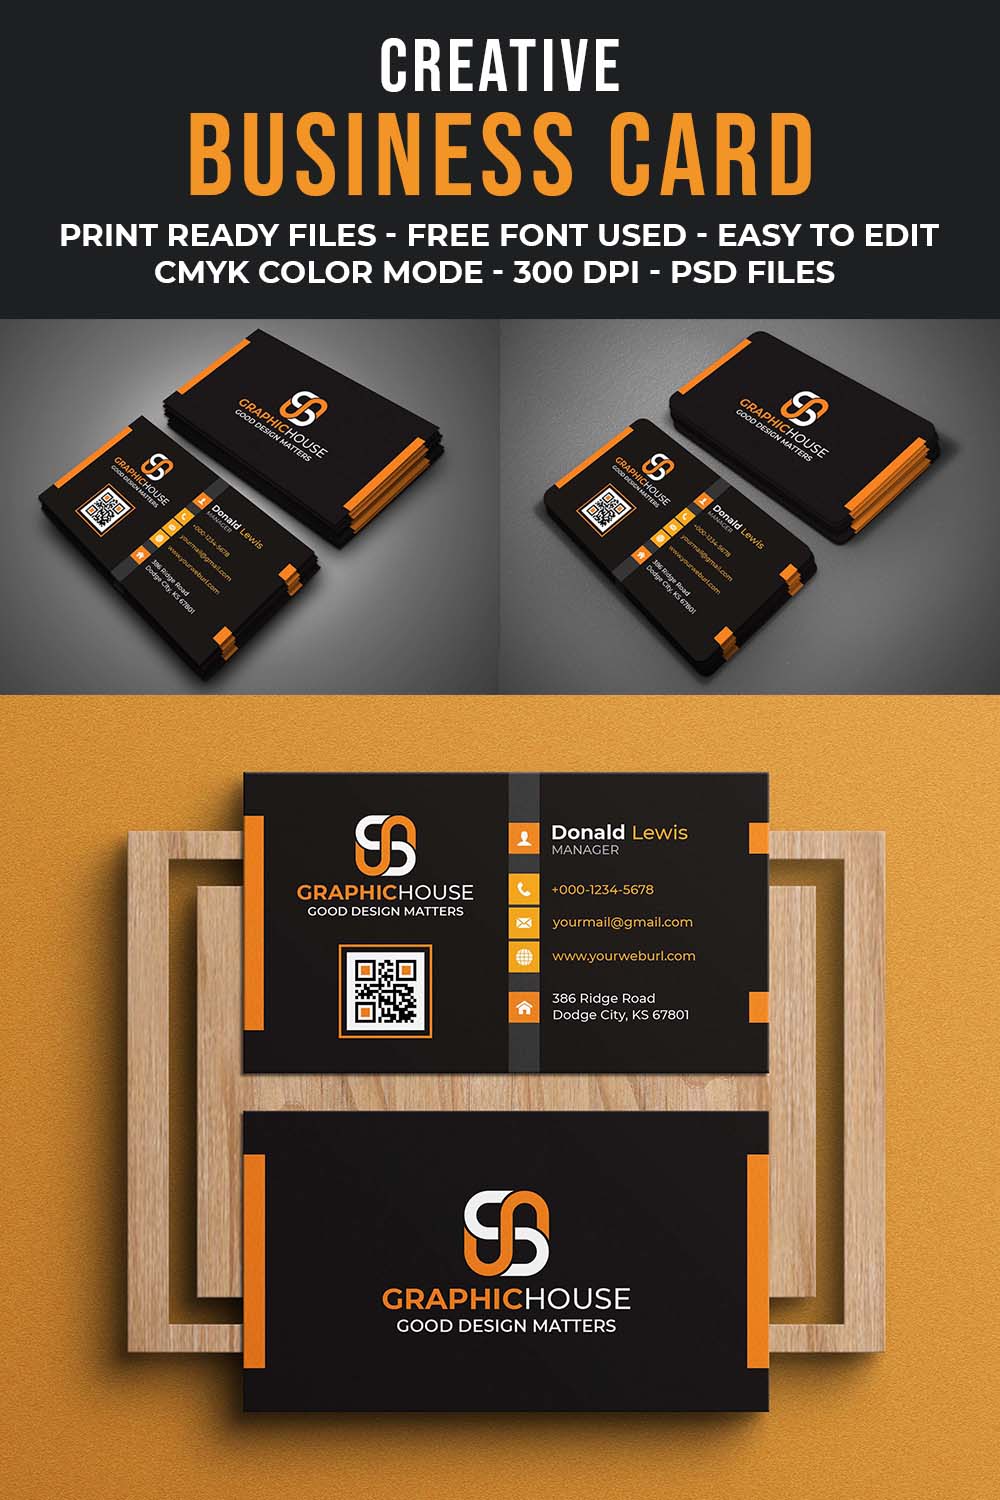 Creative Modern And Professional Business Card Template Pinterest Image.